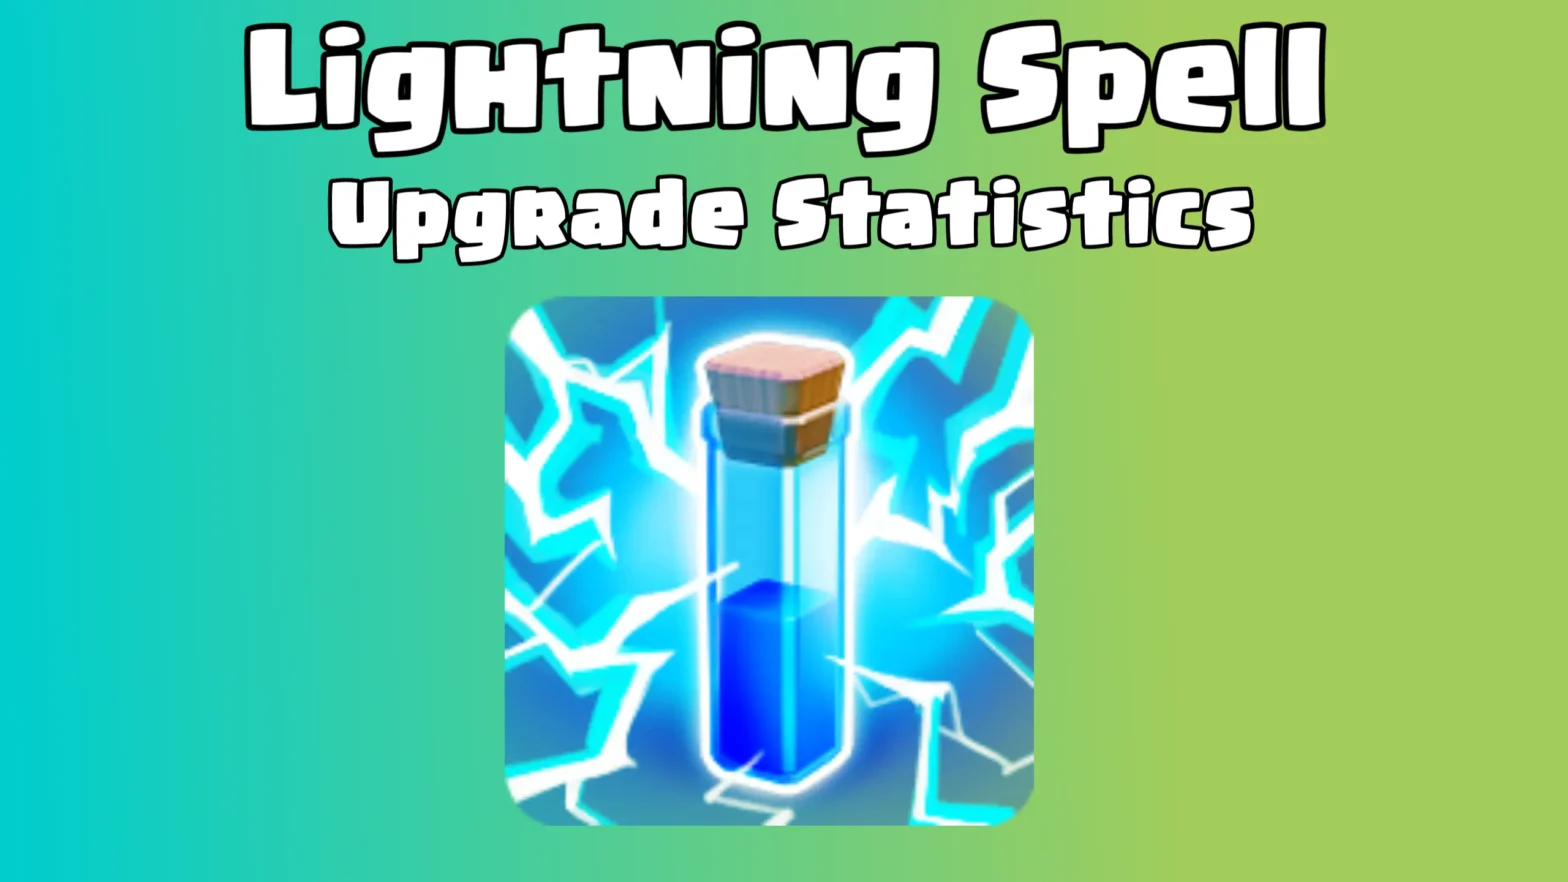 Clash of Clans: Lightning Spell Upgrade Cost and Upgrade Time